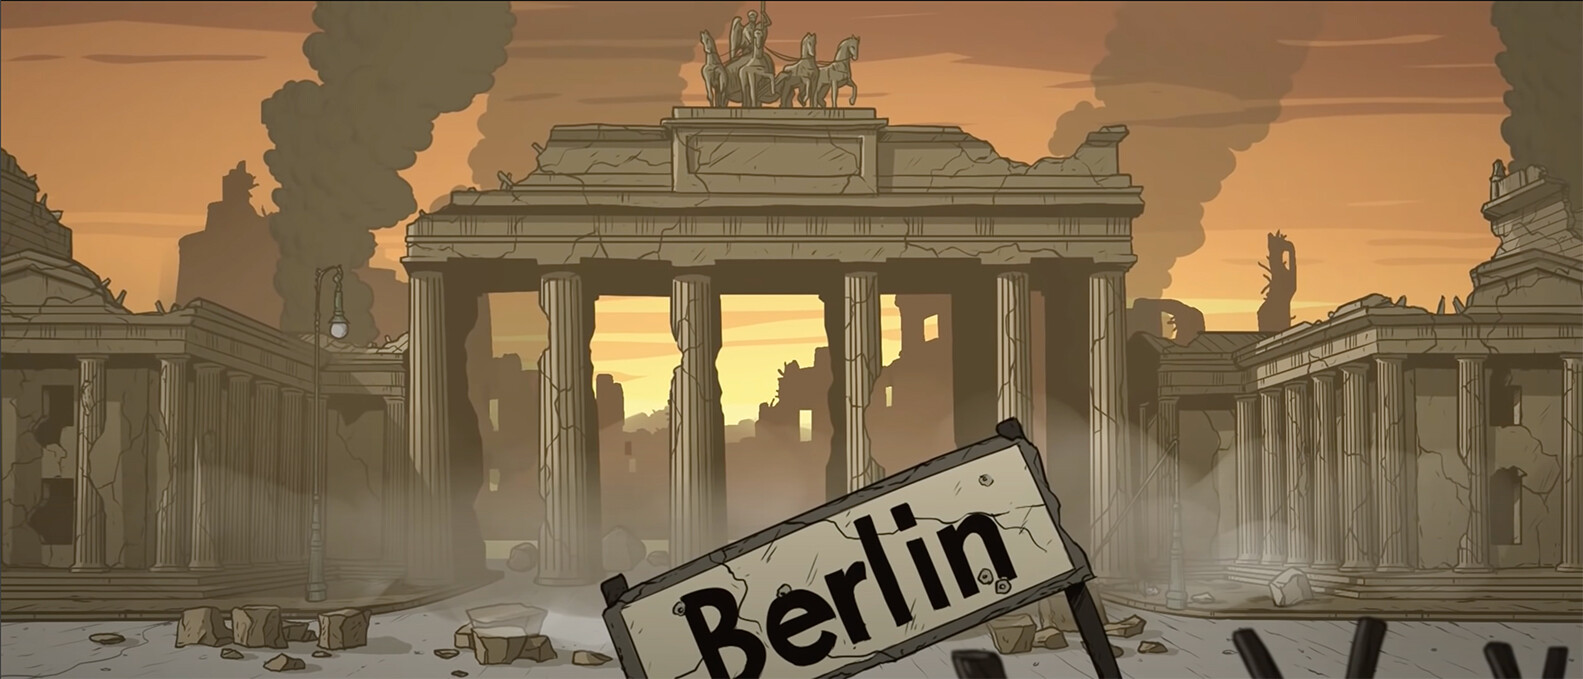 A better shot of Berlin. Again, learning what assets the art team might already have, or what might be easier for them to create.